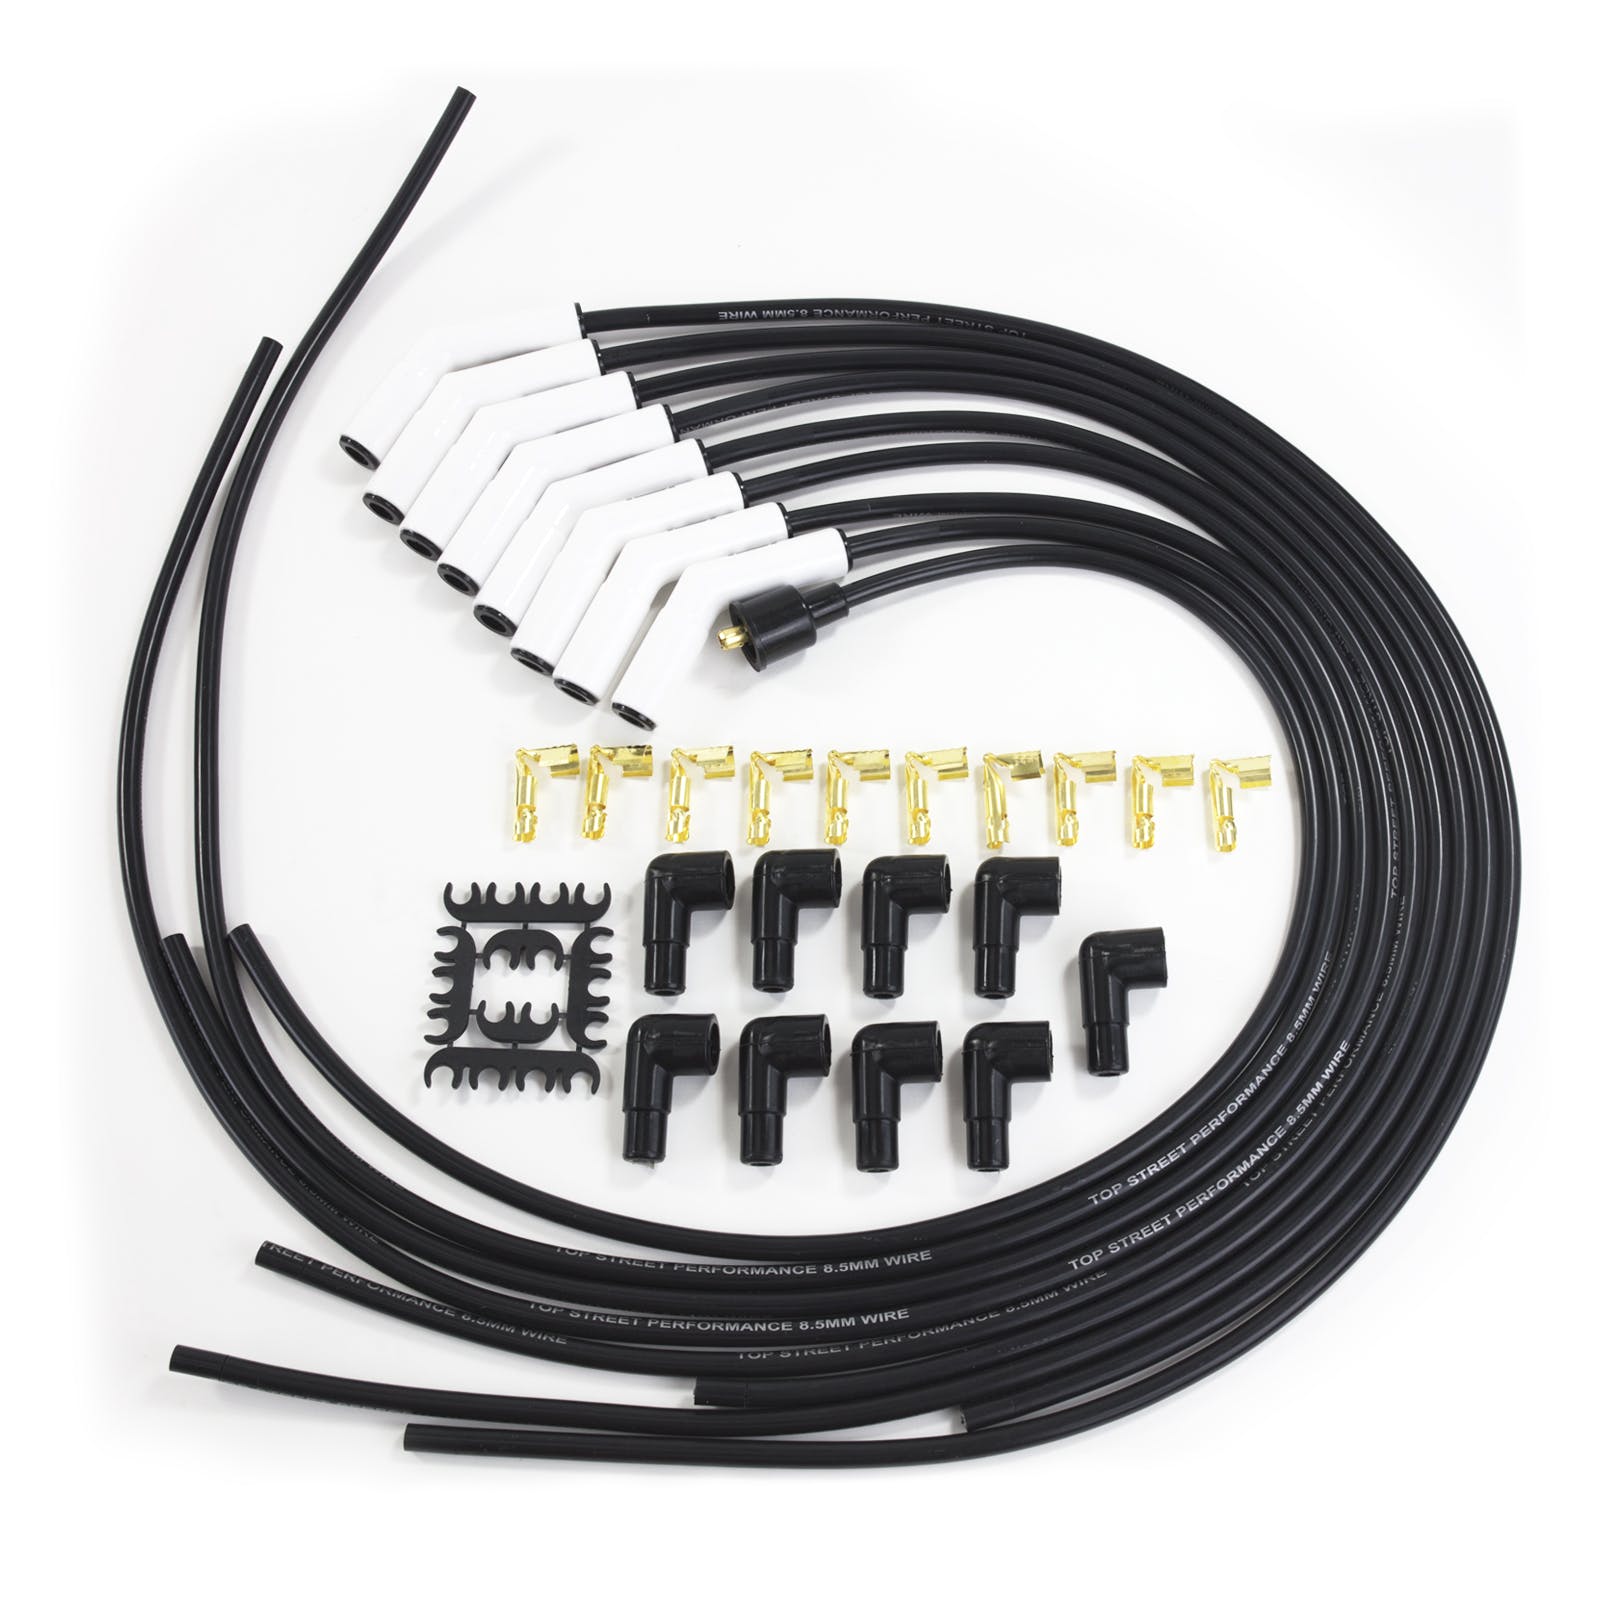 Top Street Performance 85035CE 8.5mm Universal Spark Plug Wire Set with 135° Ceramic Plug Boots, Black Wire